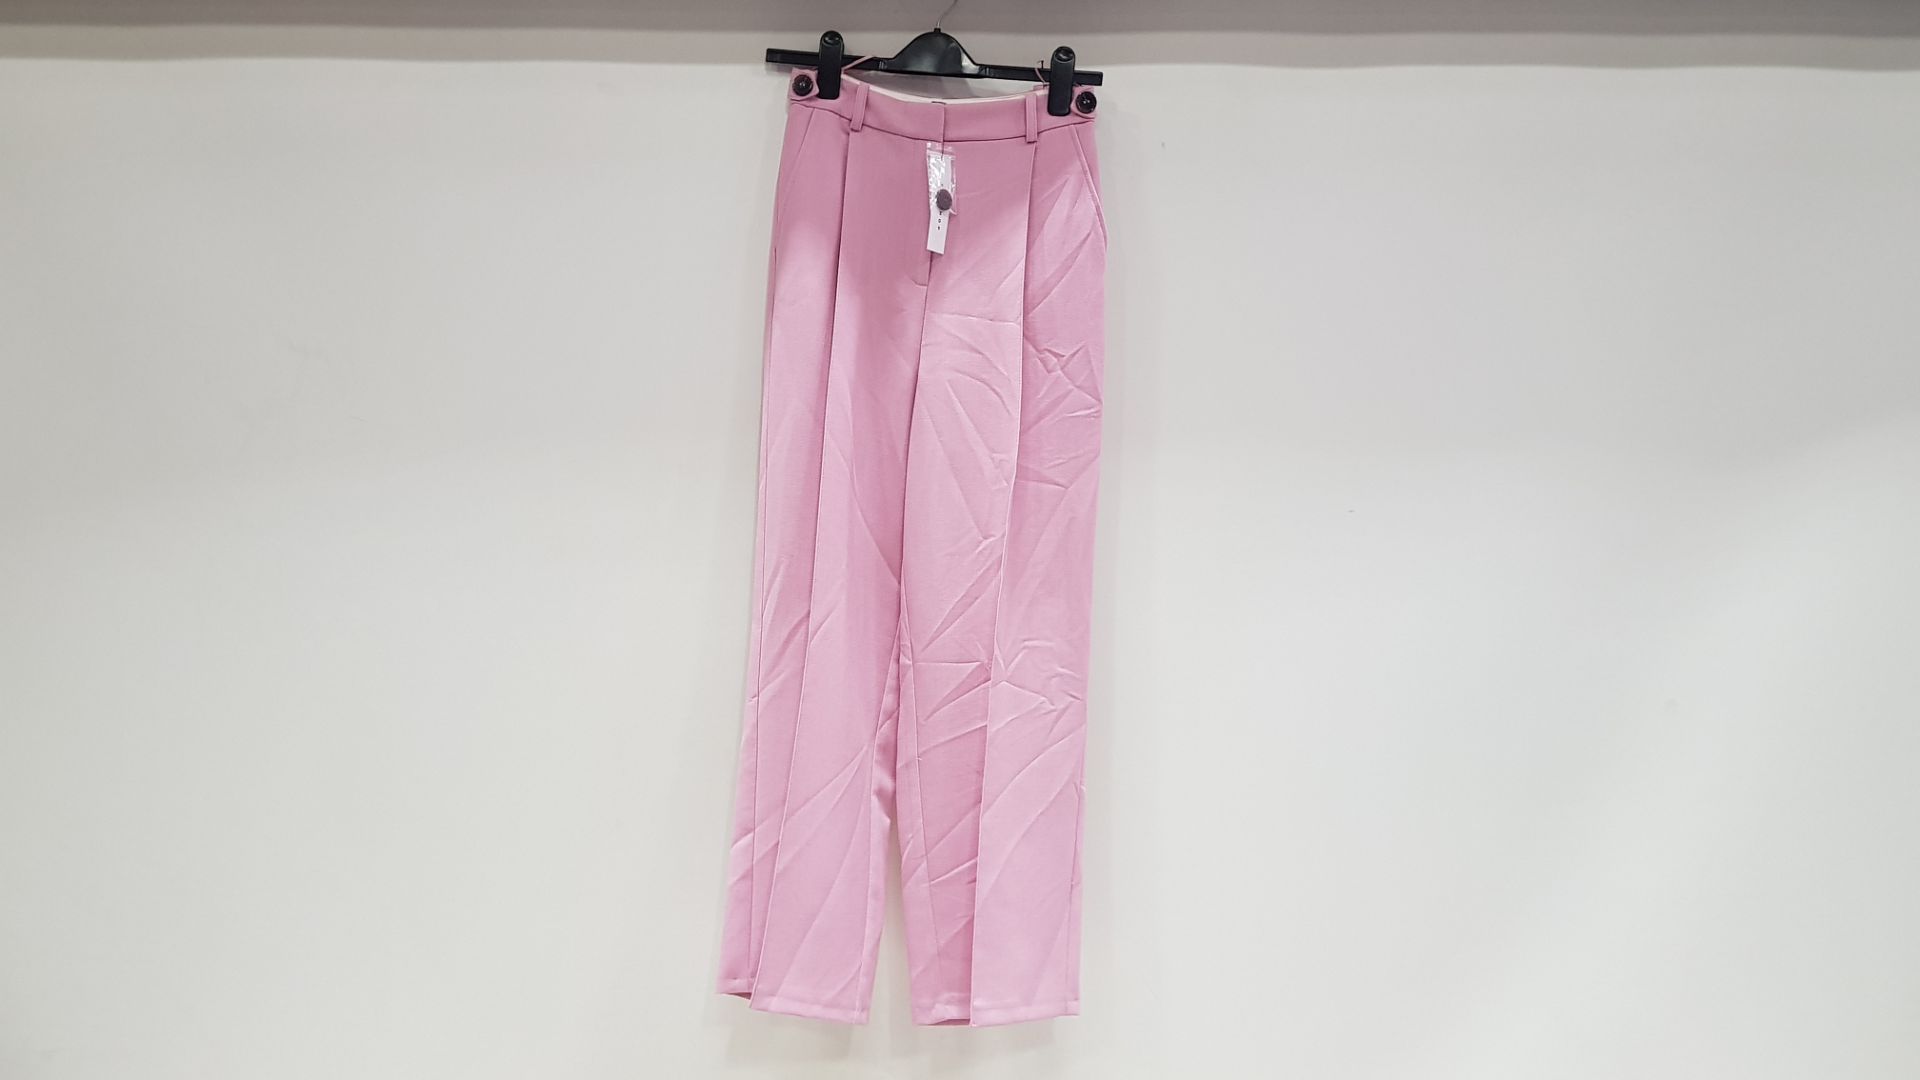 10 X BRAND NEW TOPSHOP PINK TROUSERS / PANTS IN VARIOUS SIZES RRP £39.00 (TOTAL RRP £390.00)